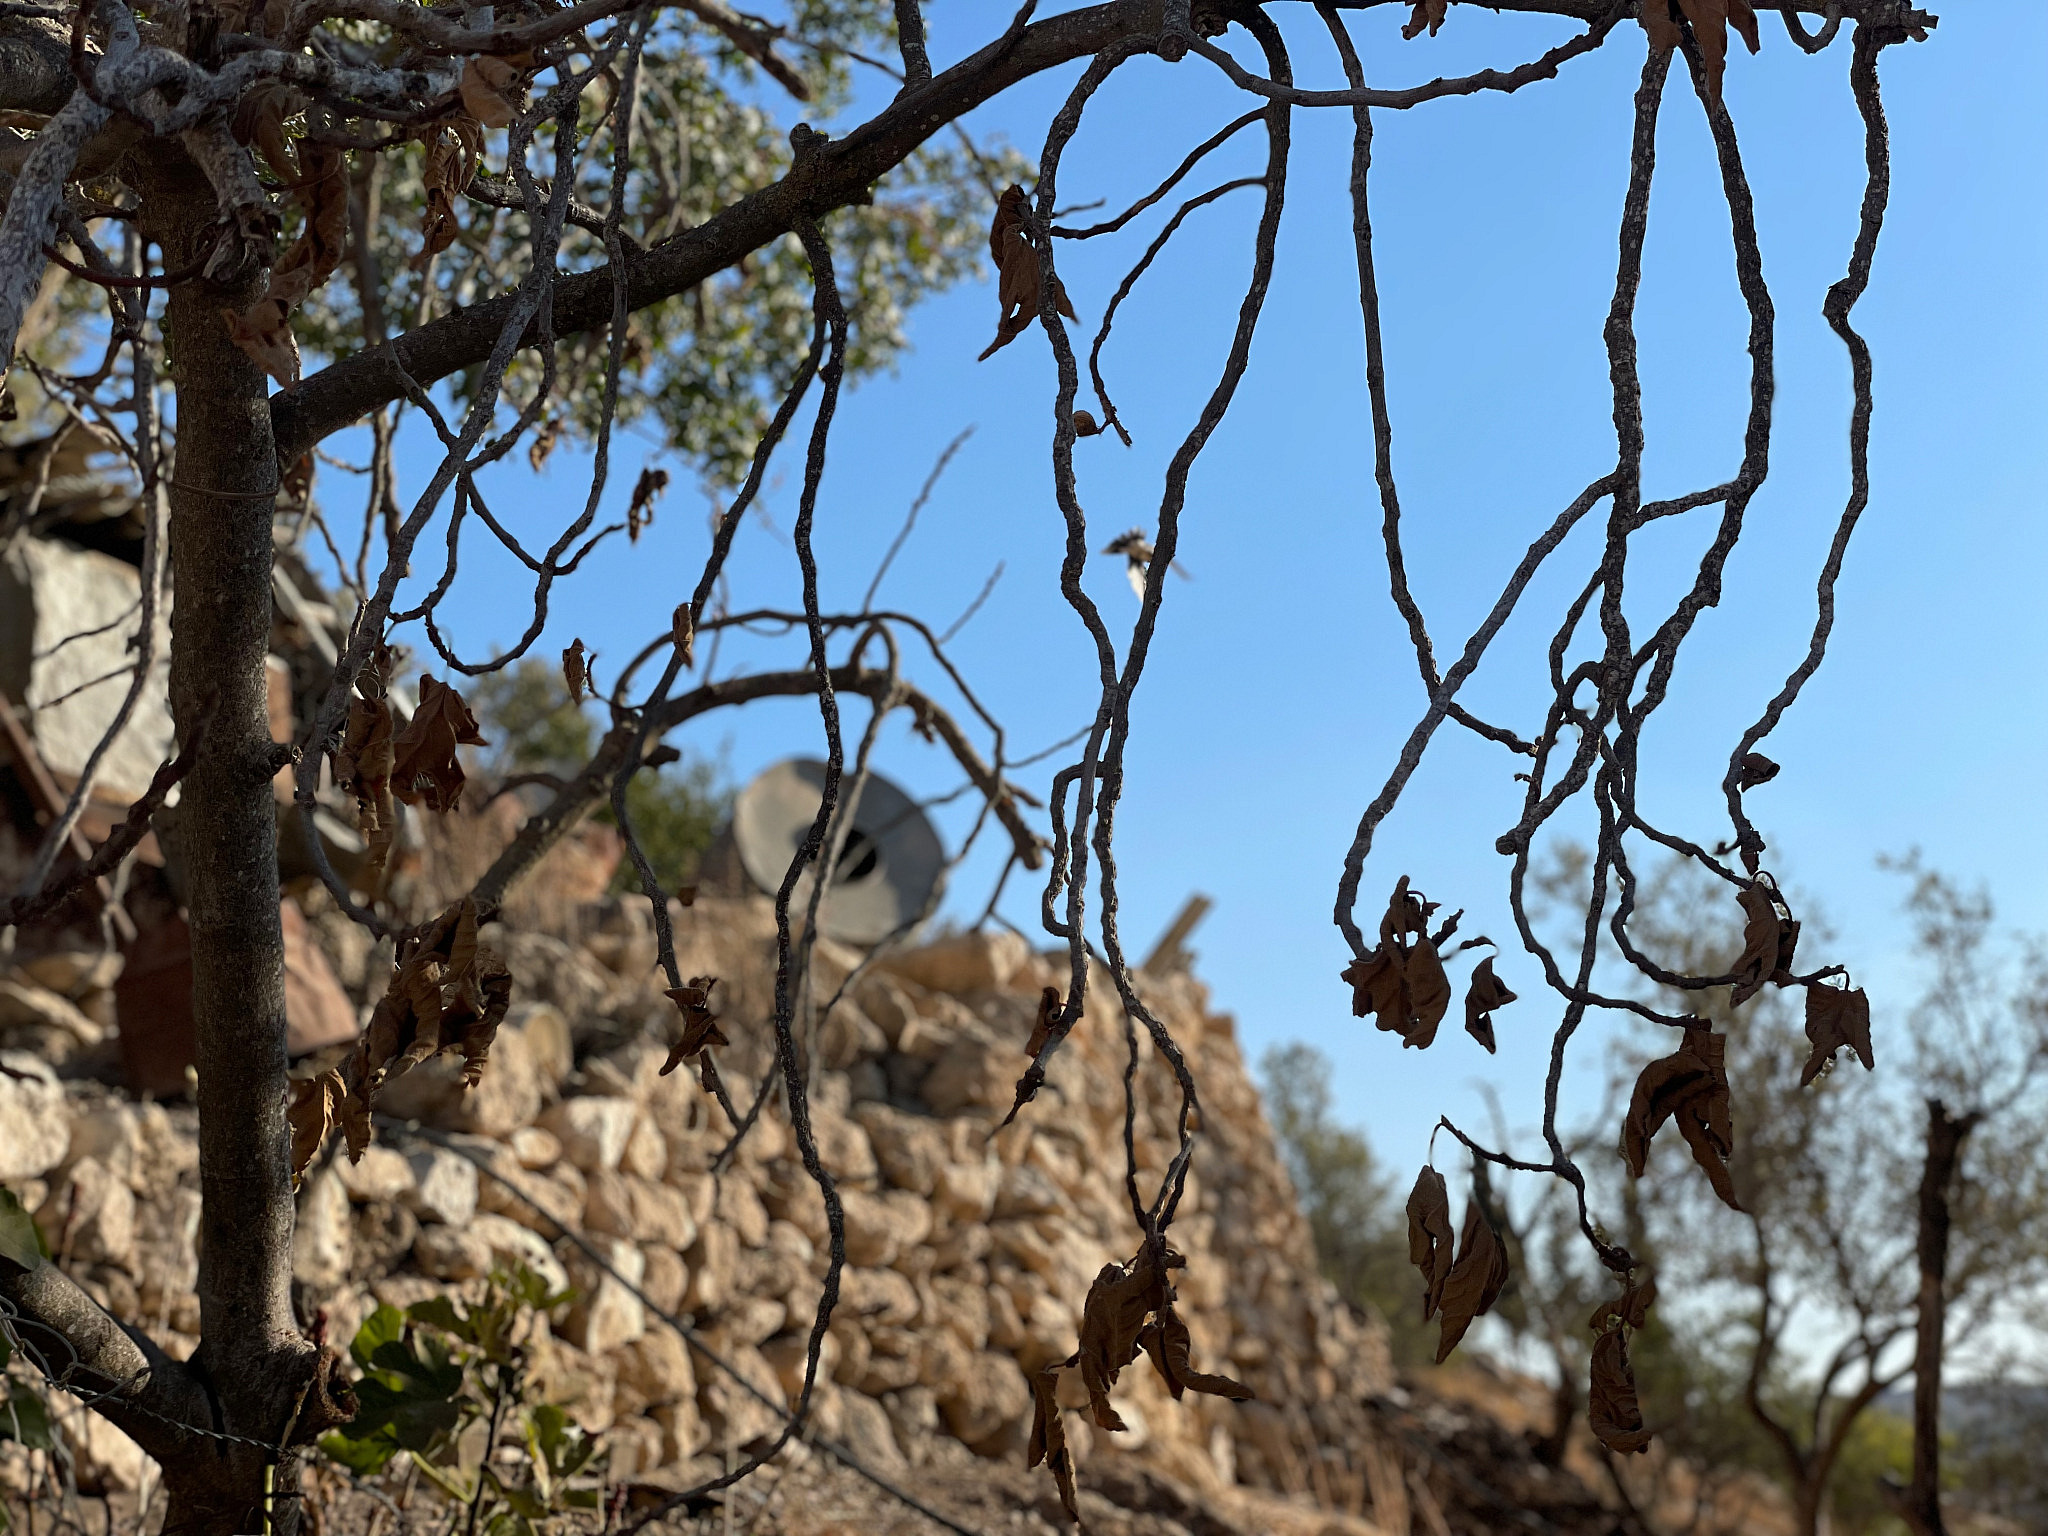 Dried fig tree in Khirbet Ar-Ratheem due to the lack of water, West Bank. (Natasha Westheimer)